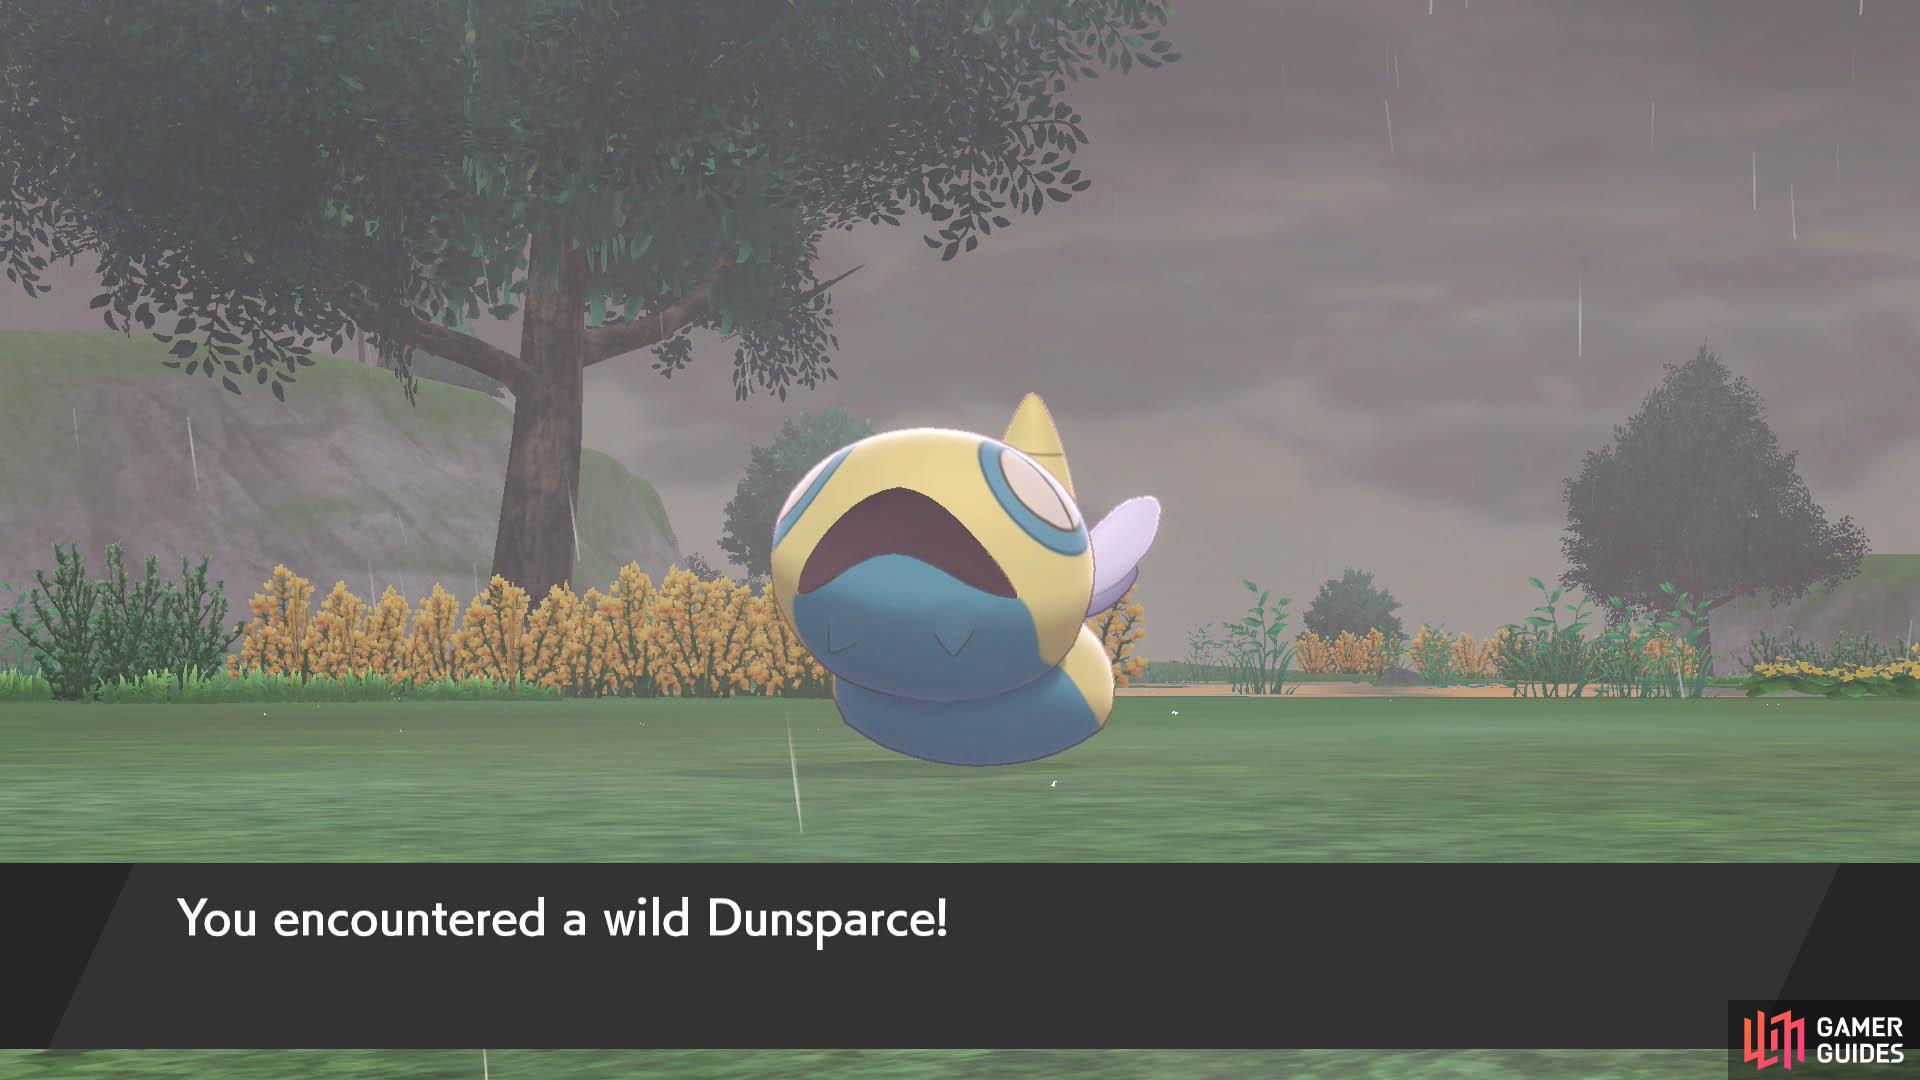 Dunsparce can be found on the overworld as well, but it’s rarer and liable to flee when agitated.